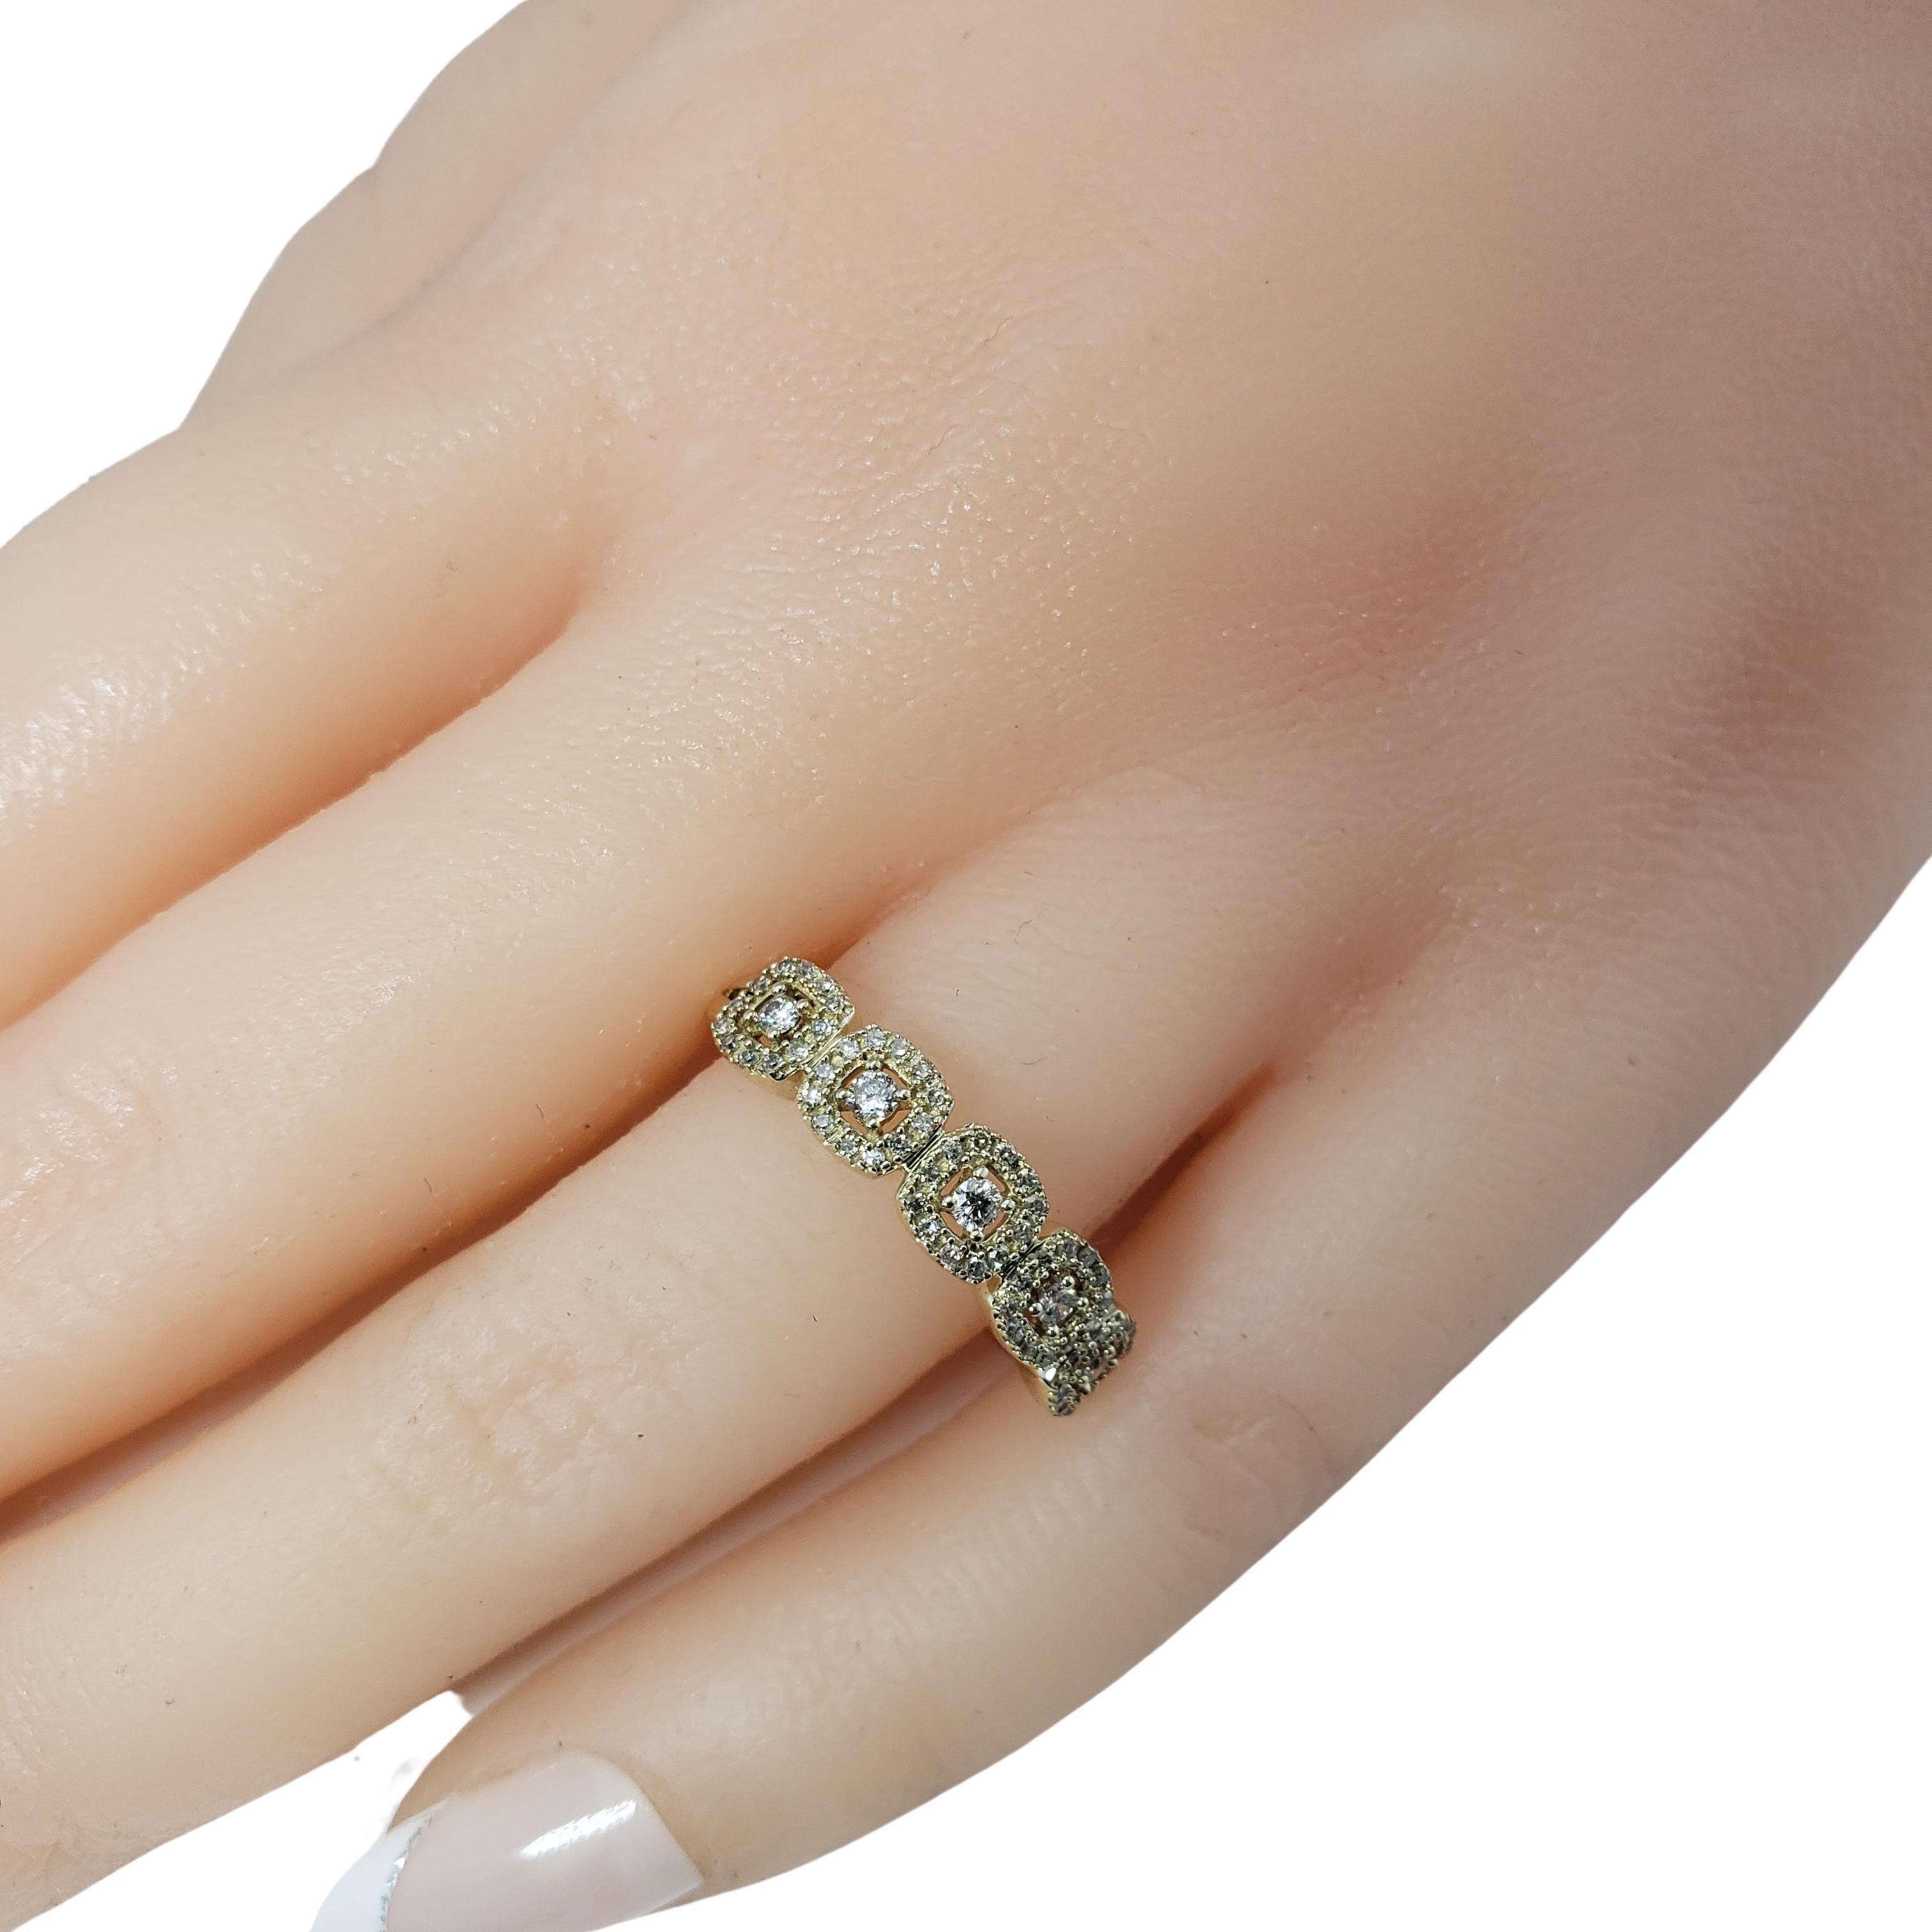 Vintage 10 Karat Yellow Gold and Diamond Ring Size 7-

This stunning ring features five round brilliant cut diamonds and 60 round single cut diamonds set in classic 10K yellow gold.
Width: 5 mm. Shank: 1.5 mm.

Approximate total diamond weight: .40